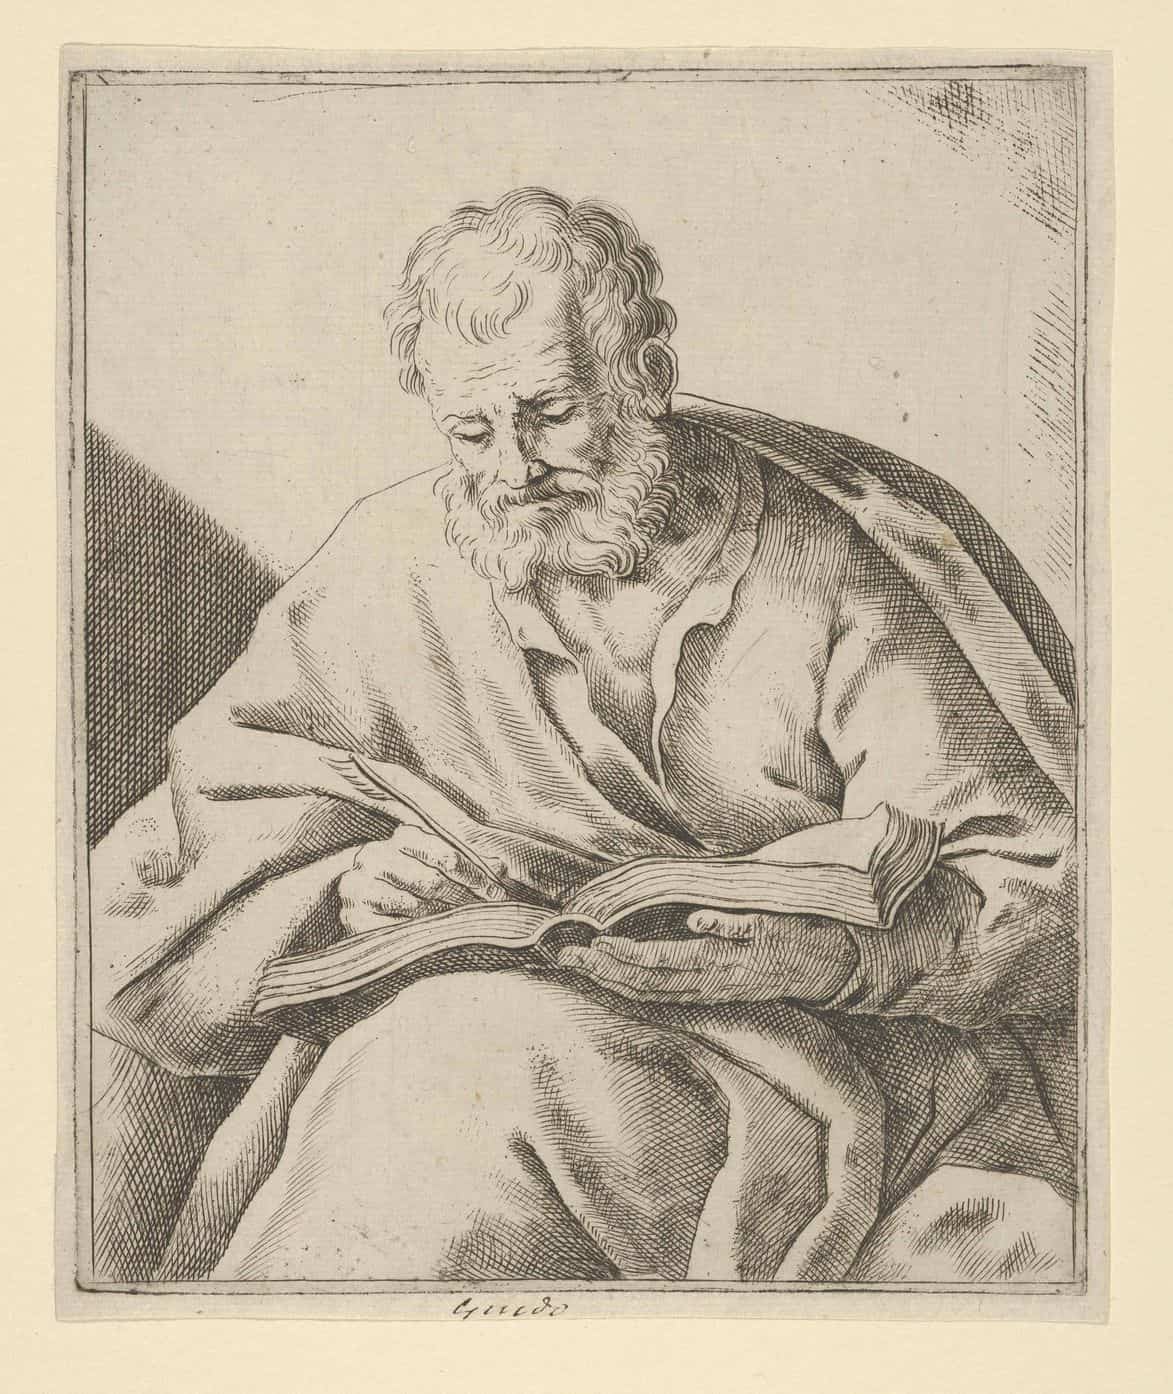 An old man seated and writing in a book (an evangelist?), 17th century, Anonymous, The Metropolitan Museum of Art (article on journaling therapy)